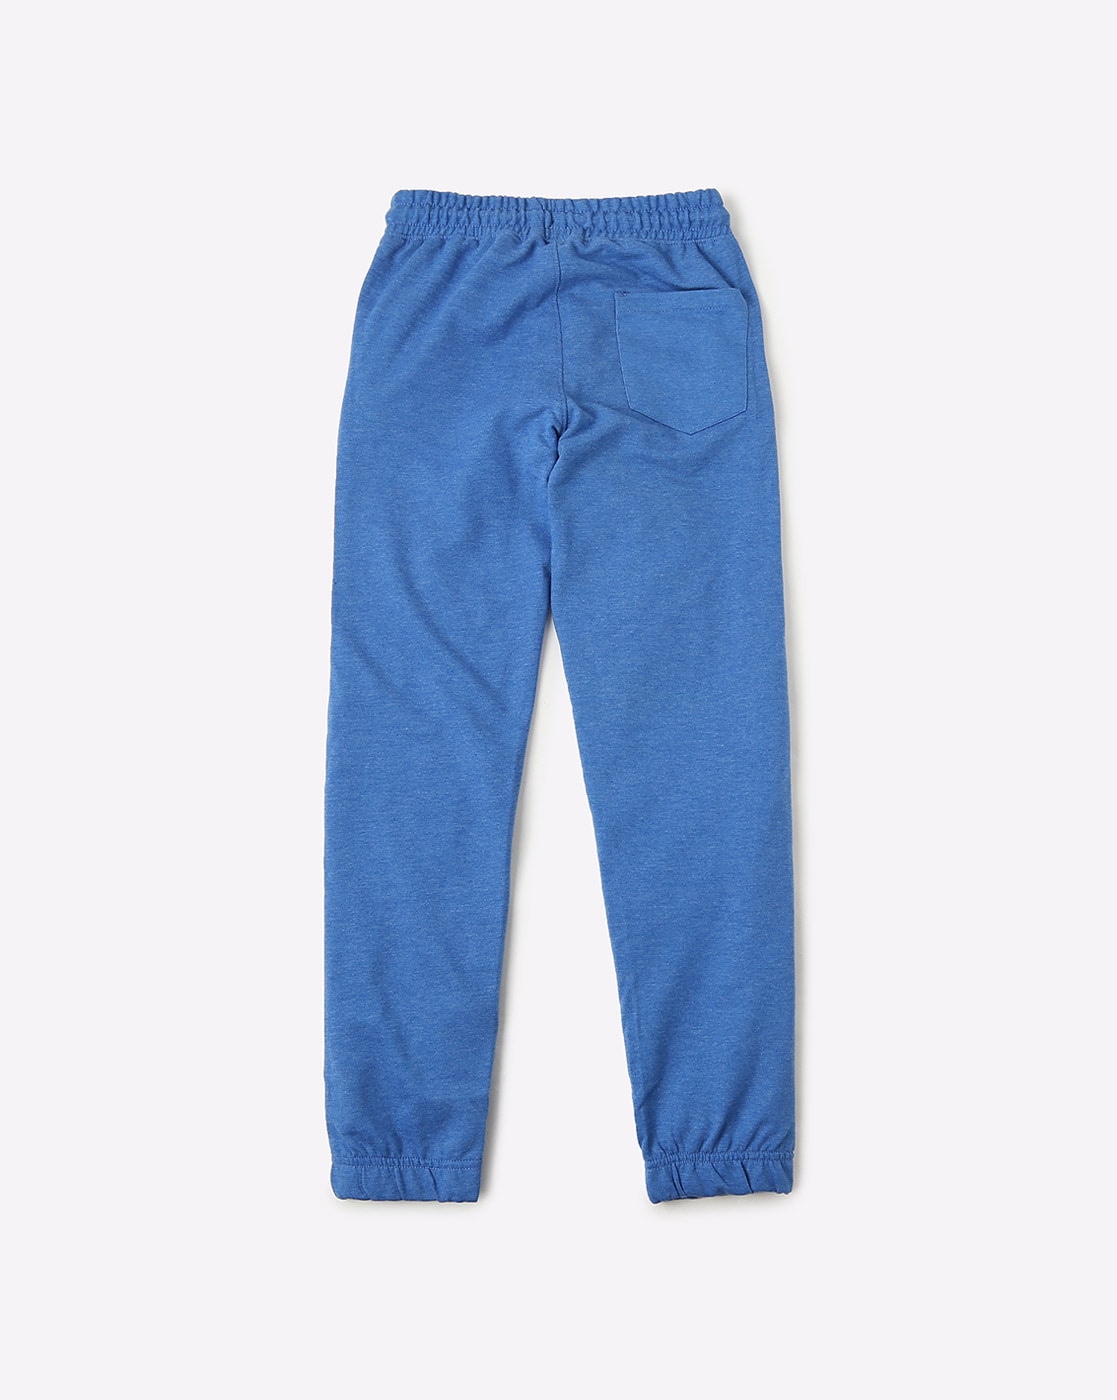 Buy Dnmx Joggers Online In India At Best Price Offers  Tata CLiQ